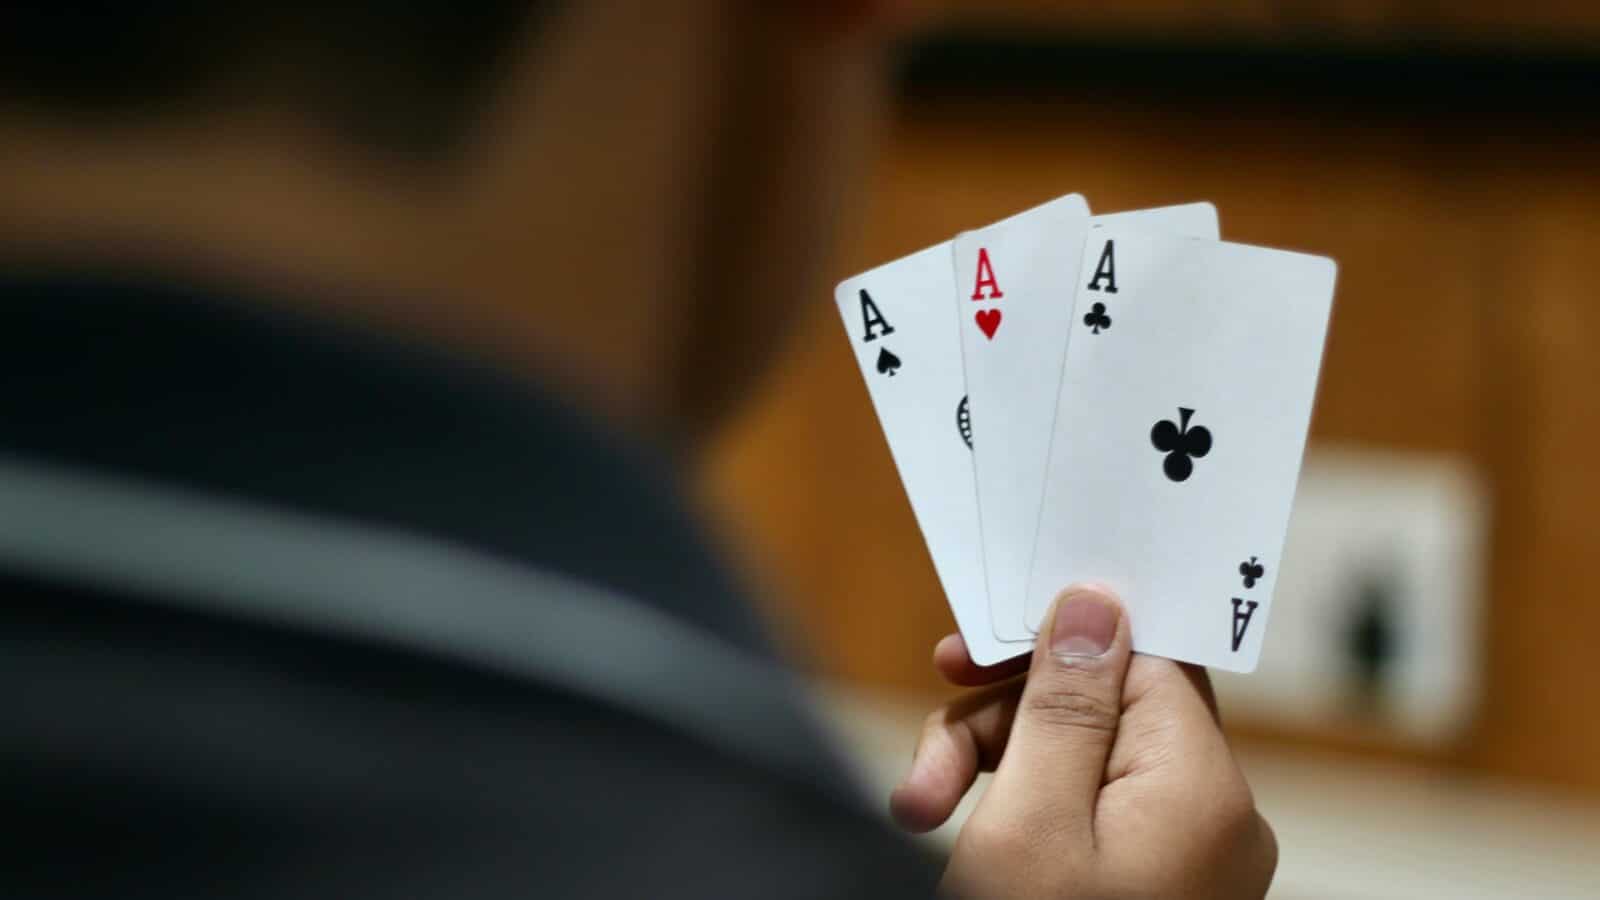 Blackjack: The Global Popularity of the Card Game